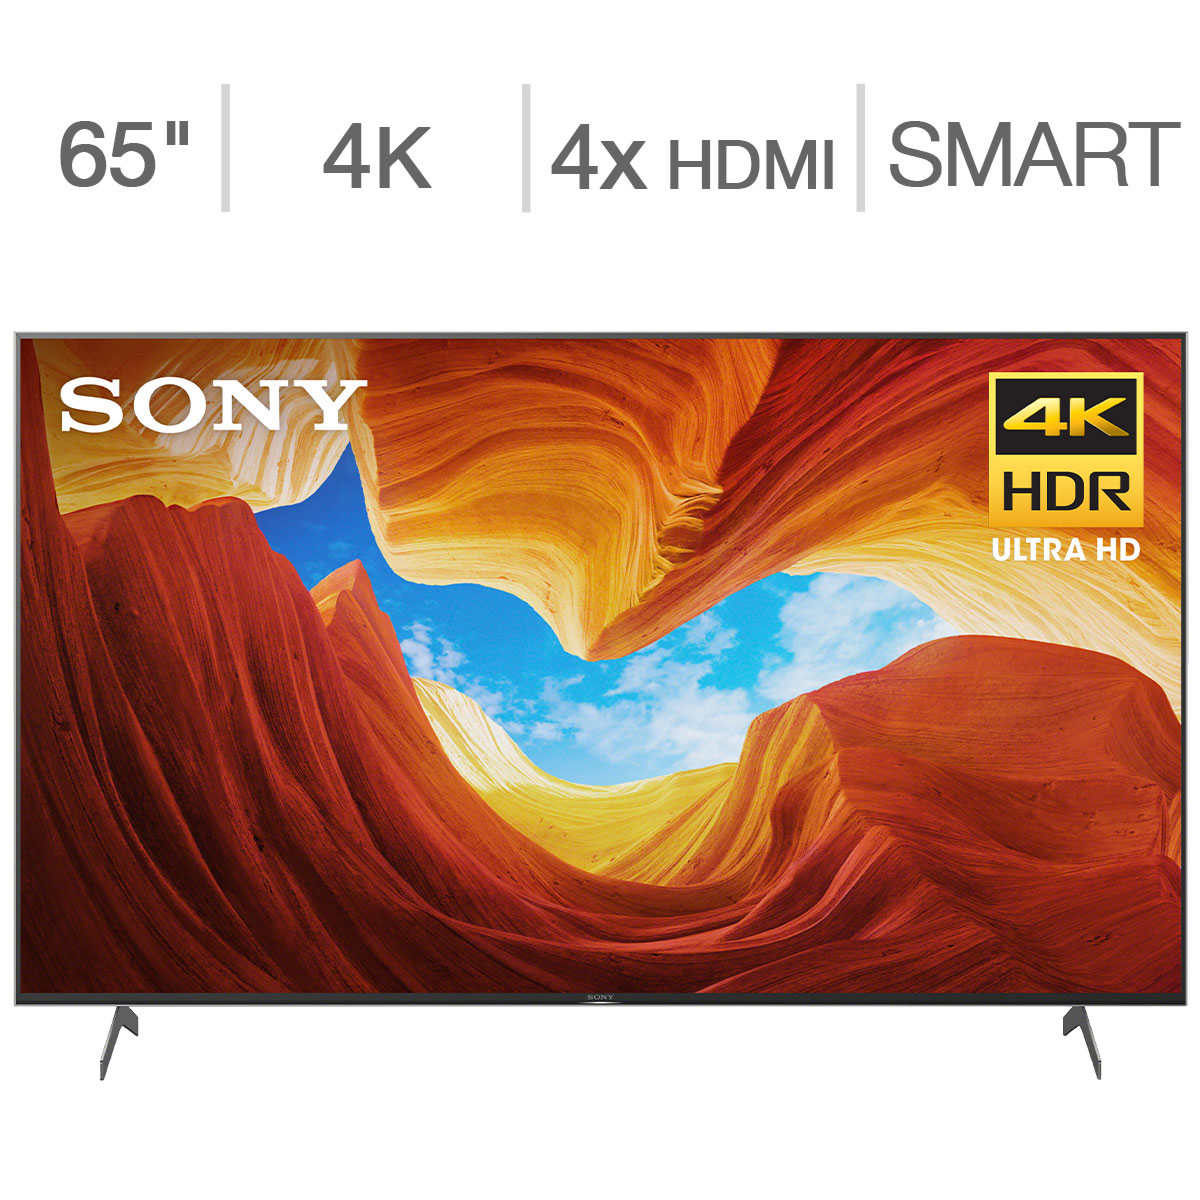 Sony X75 Ch Vs X75Ch - 4k Hdr Led Lcd Tv With Triluminos Display Android Tv X90f Sony Ca : Find ...